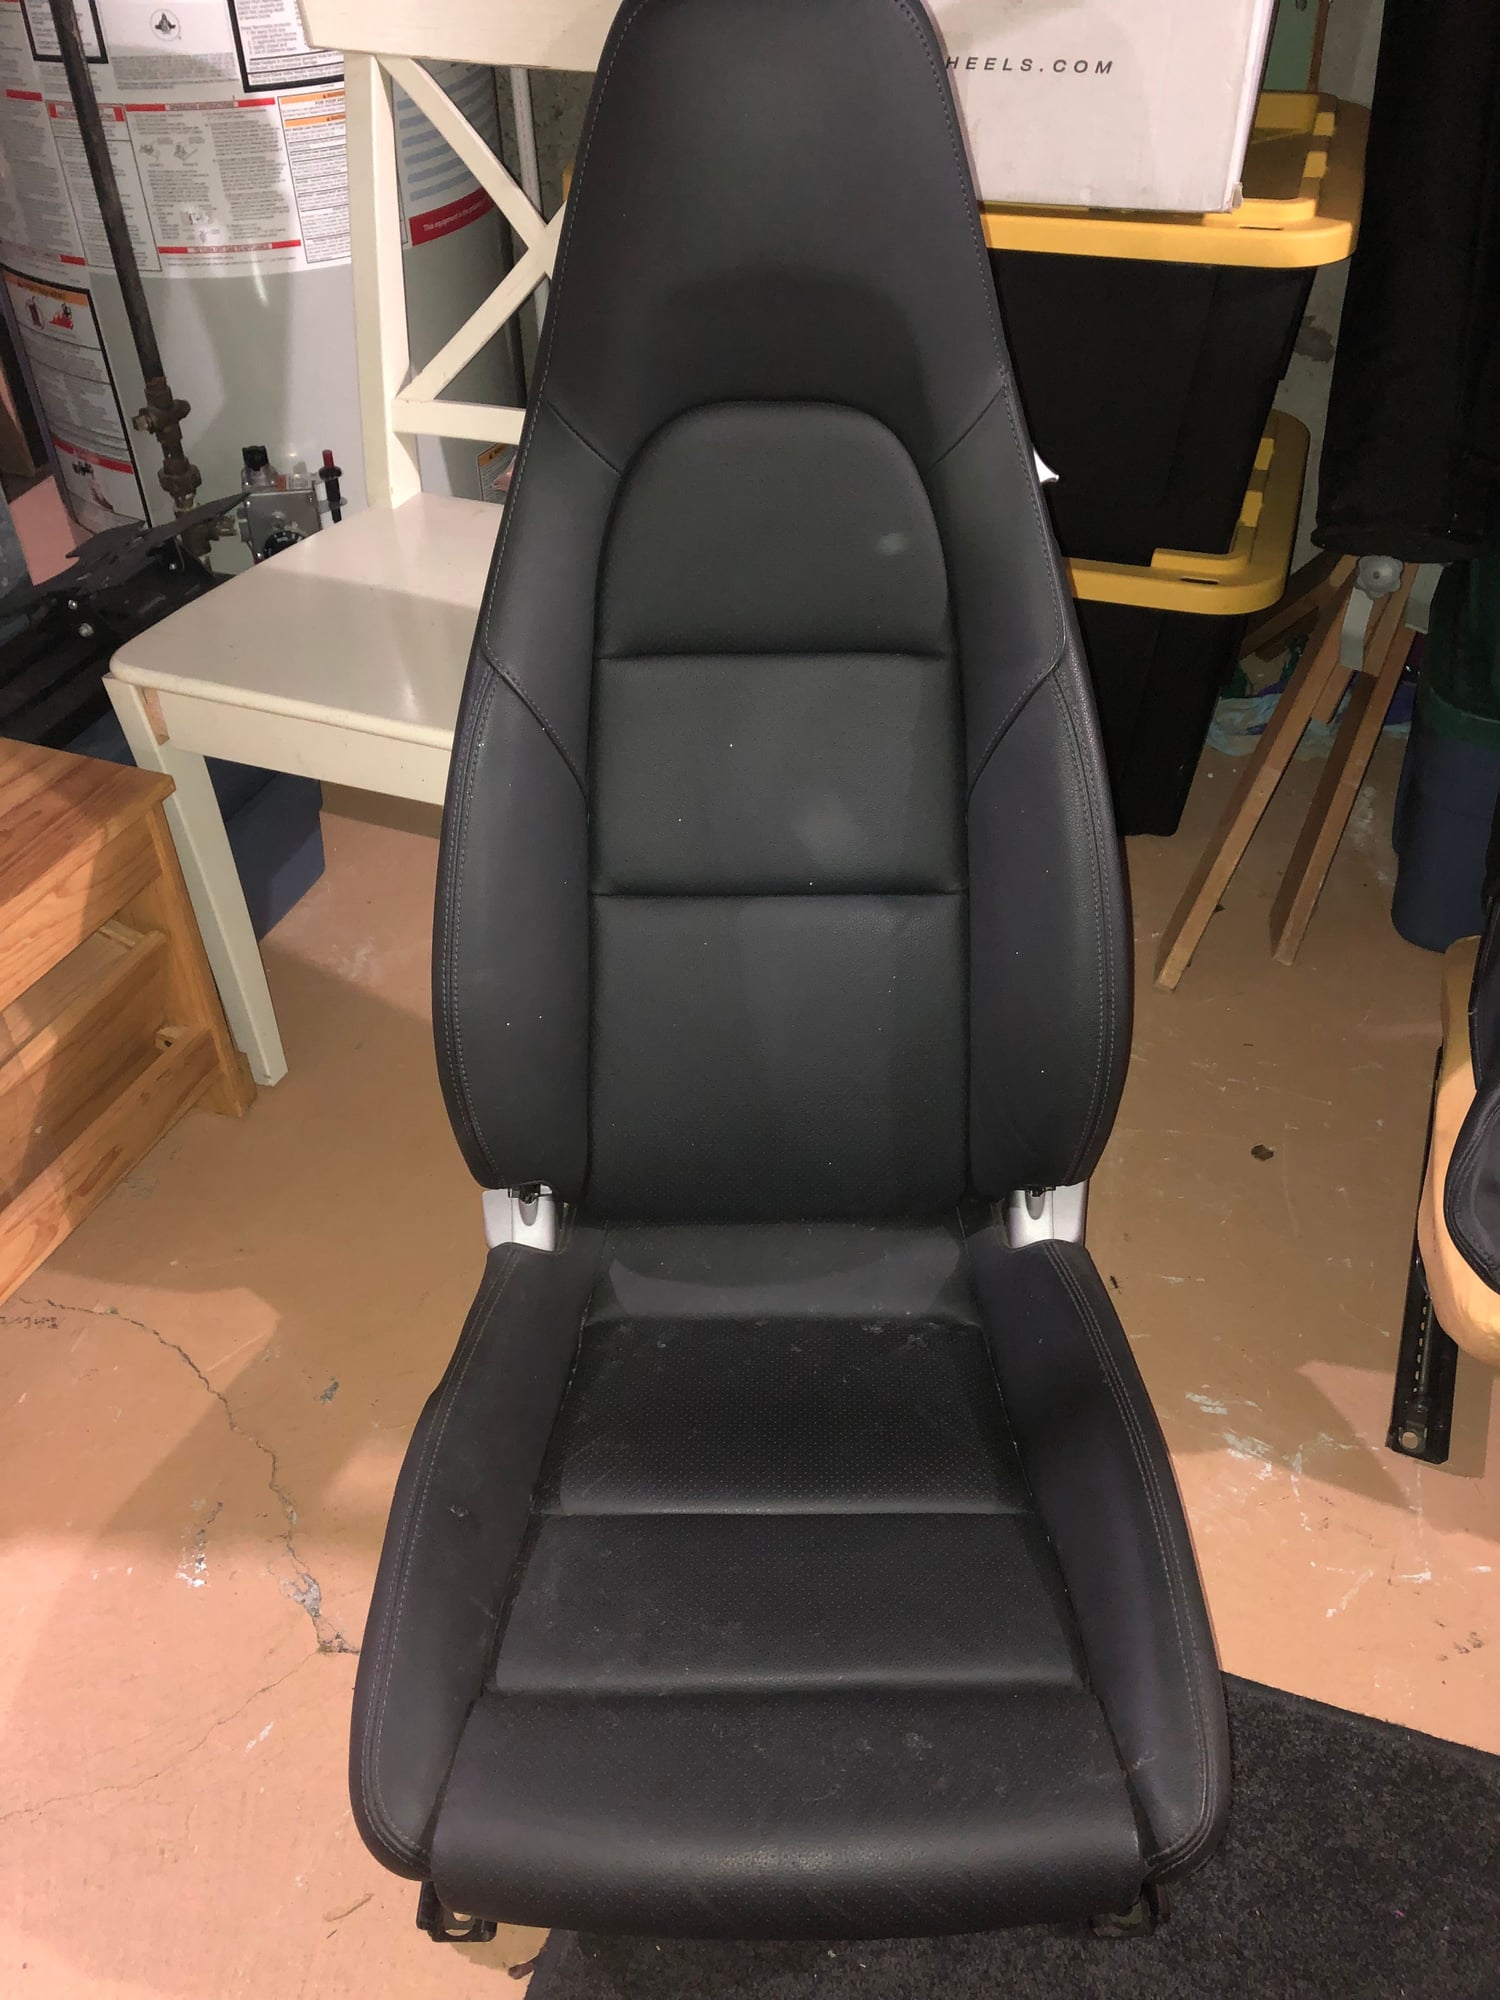 Interior/Upholstery - Garage clean out - Used - 1999 to 2011 Porsche 911 - Oakville, ON L6H 3J, Canada